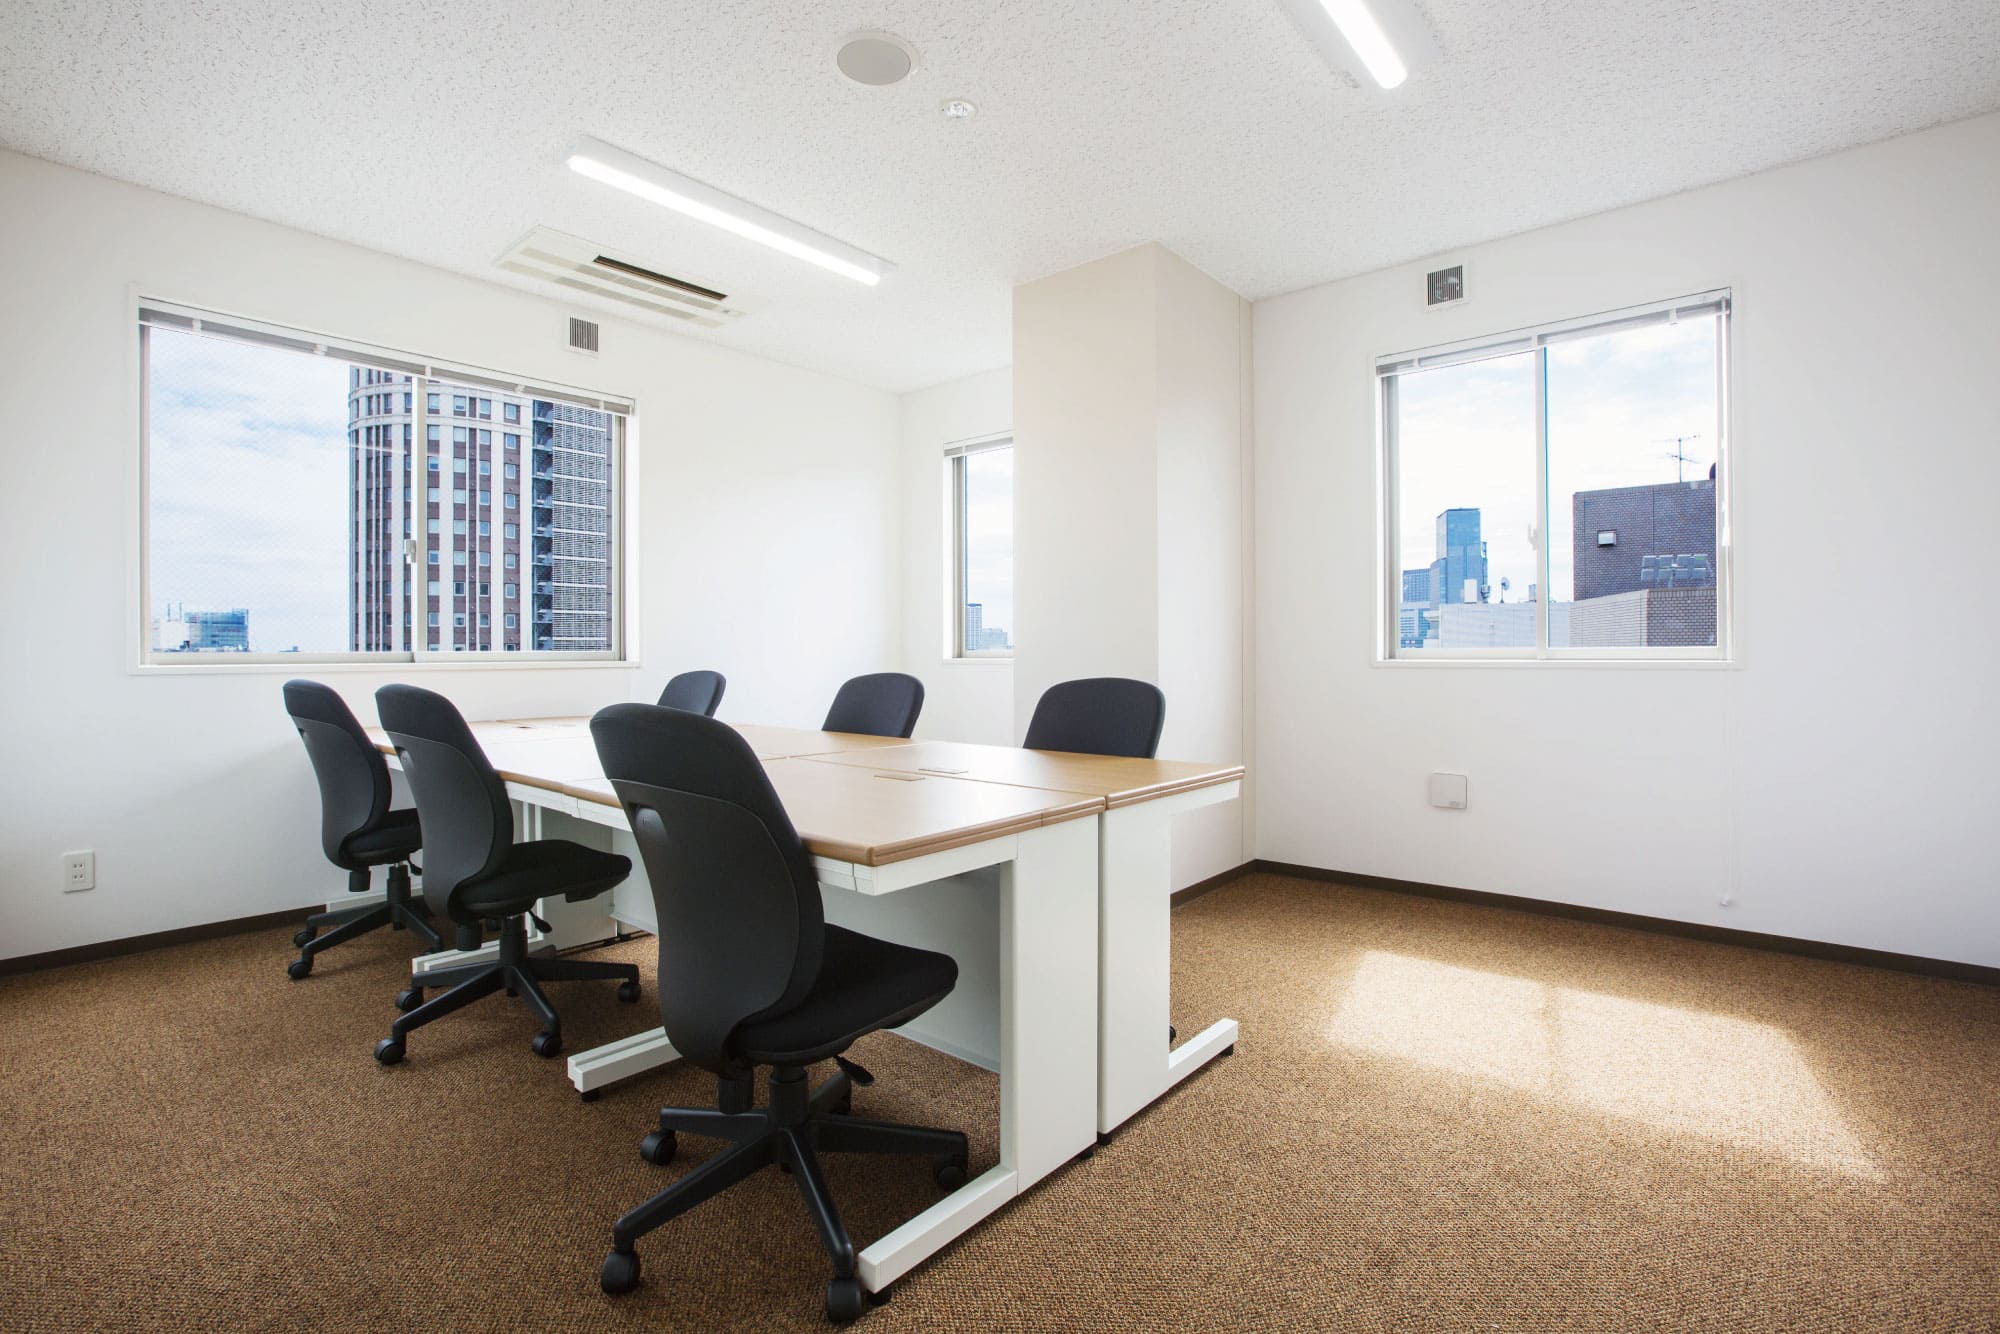 Office space for 10 person with window - TENSHO OFFICE Akihabara Manseibashi